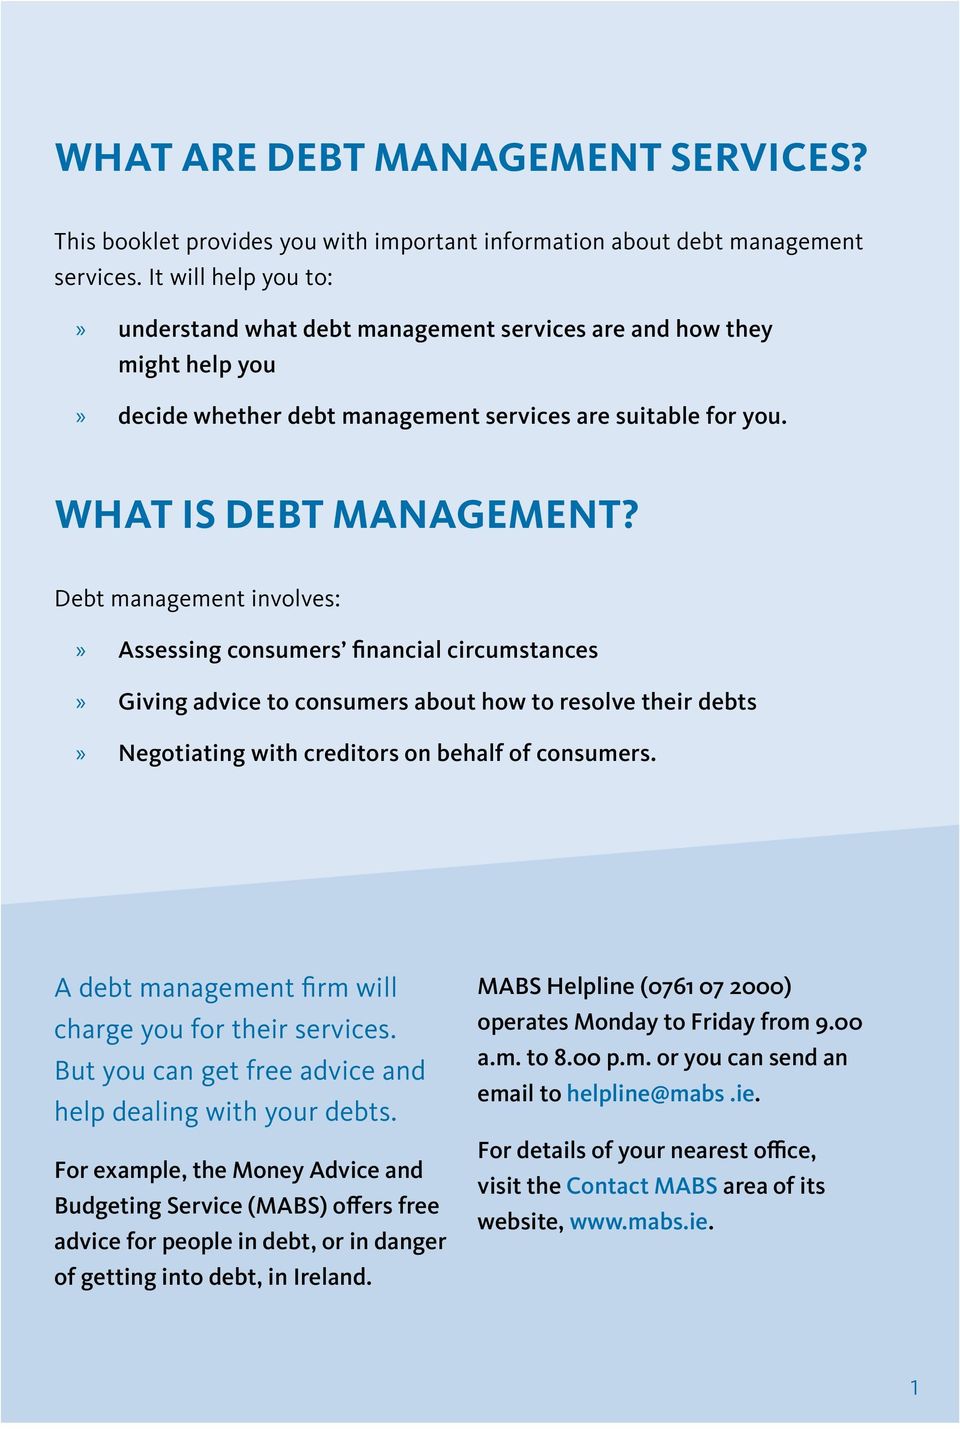 Debt management involves: Assessing consumers financial circumstances Giving advice to consumers about how to resolve their debts Negotiating with creditors on behalf of consumers.